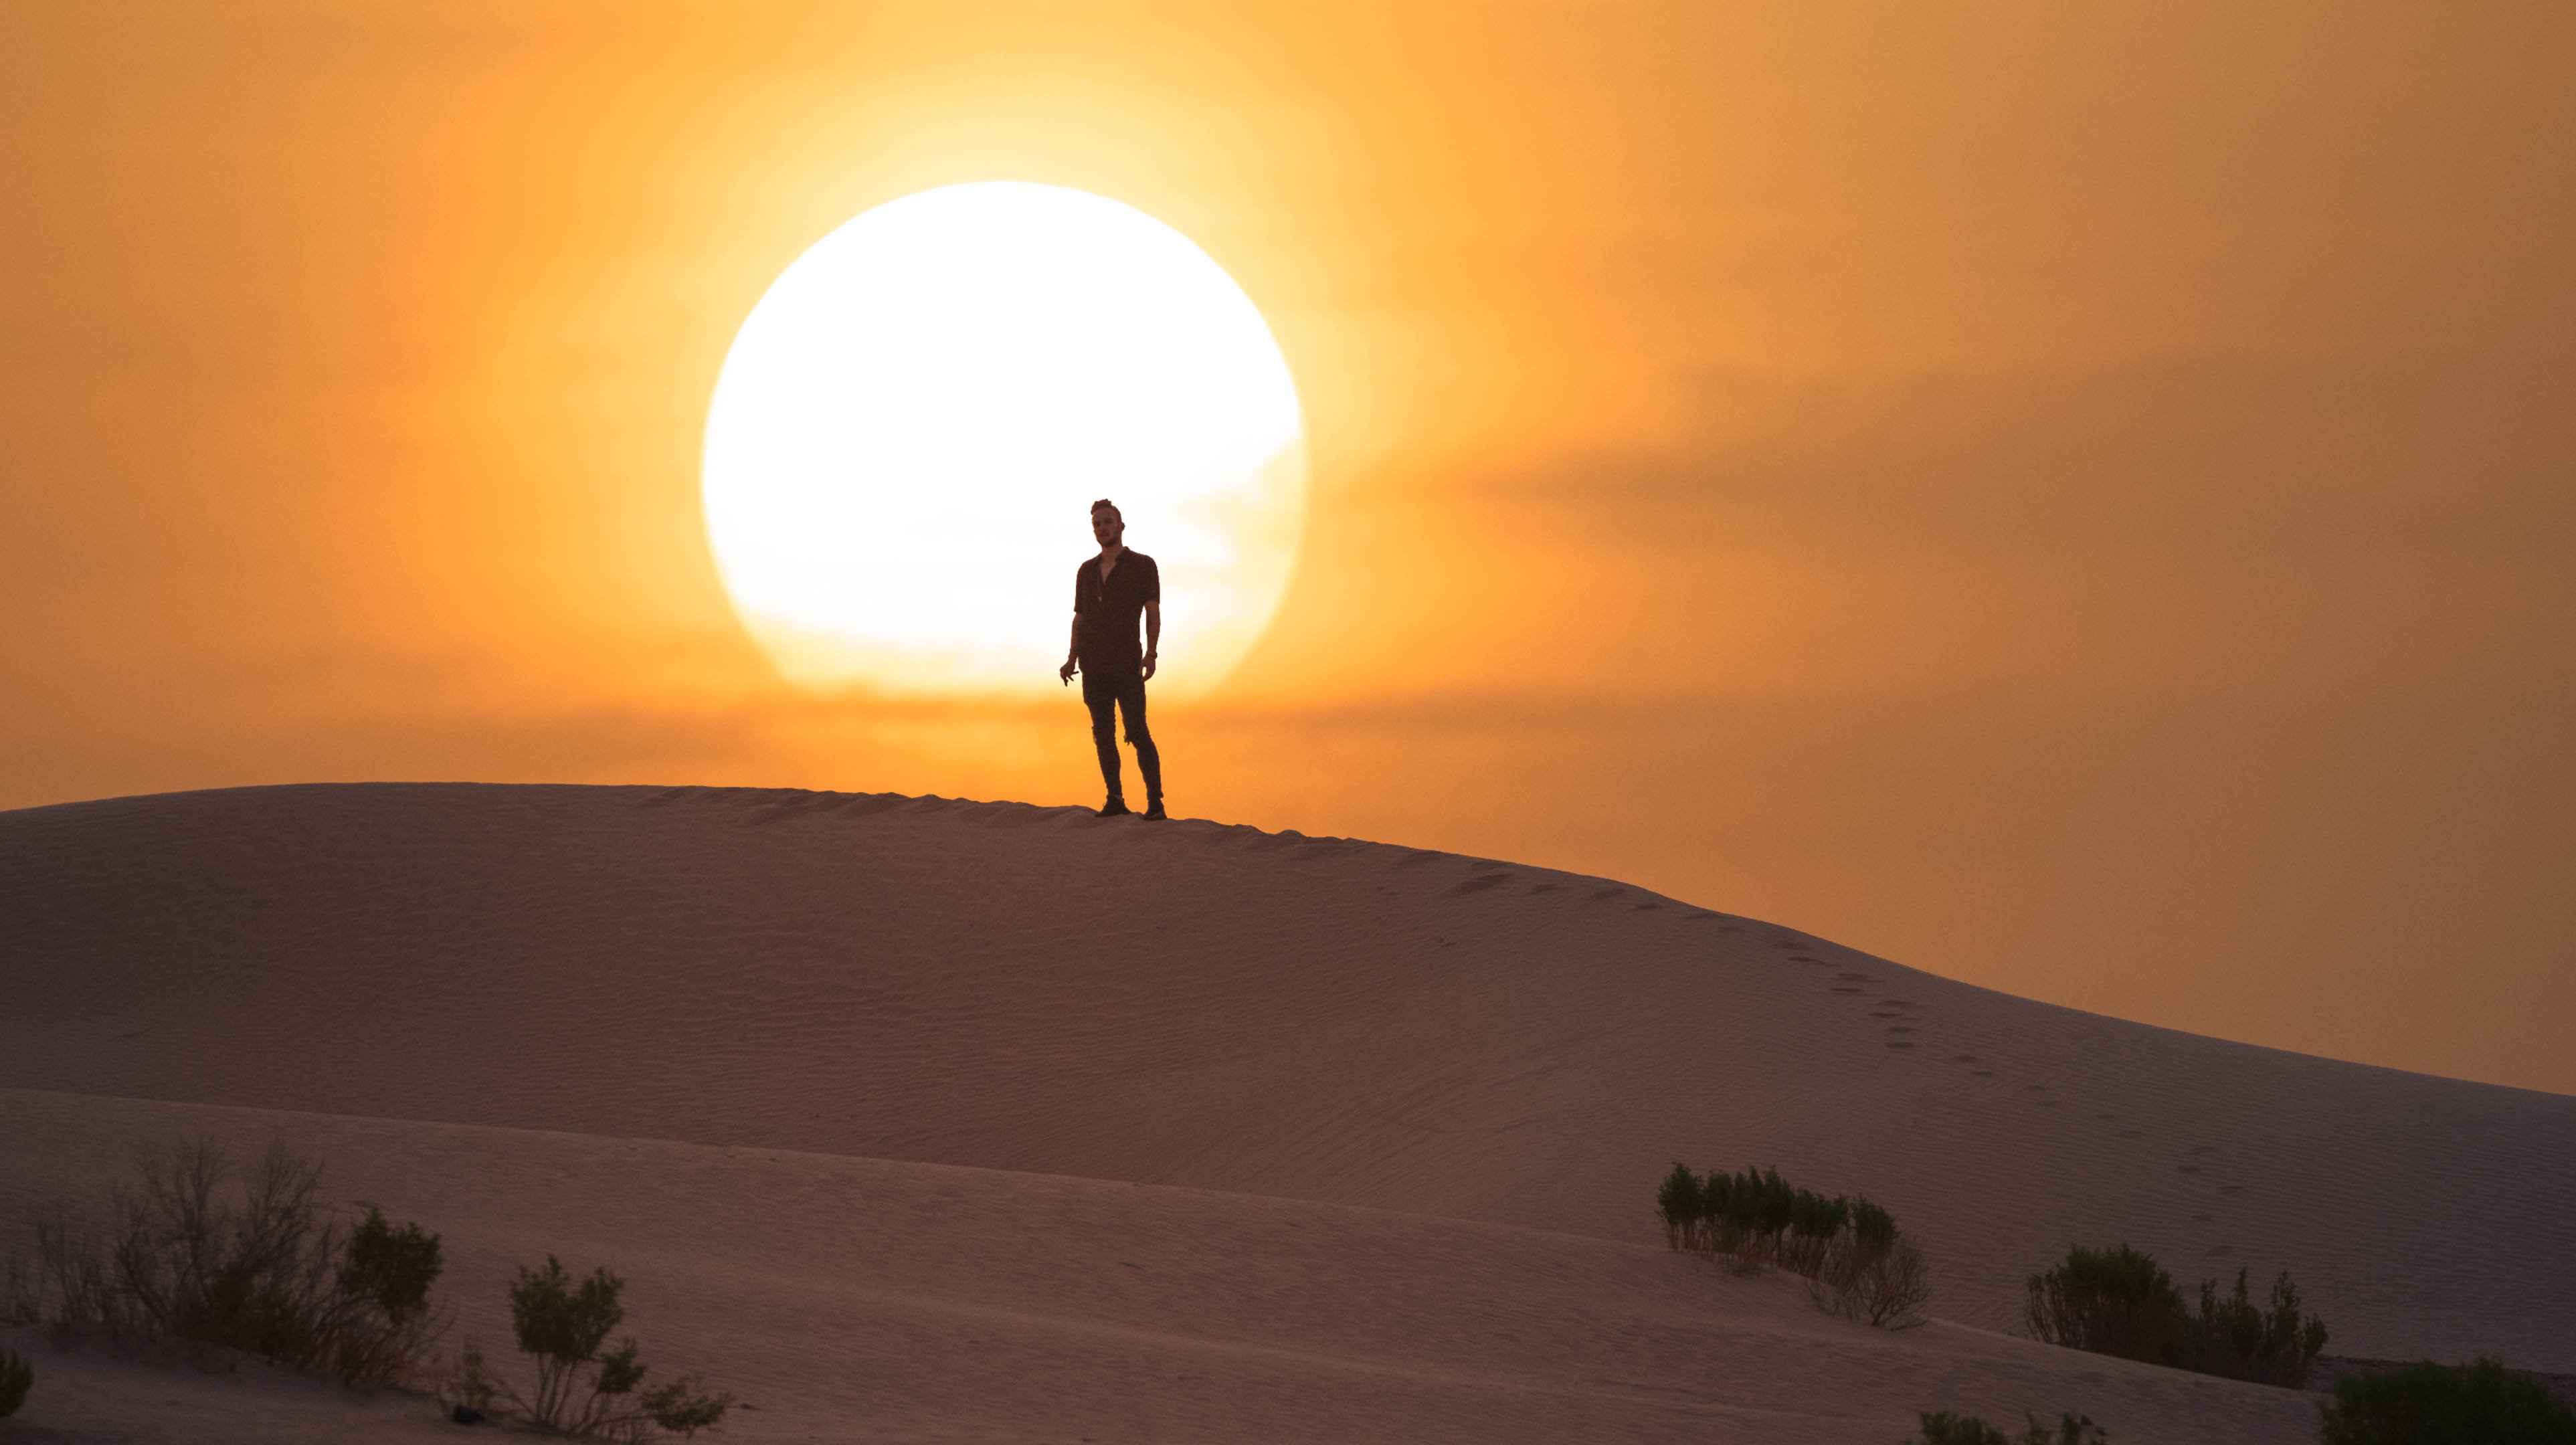 Man standing on a sand dune in the Abu Dhabi desert with the sun rising behind him